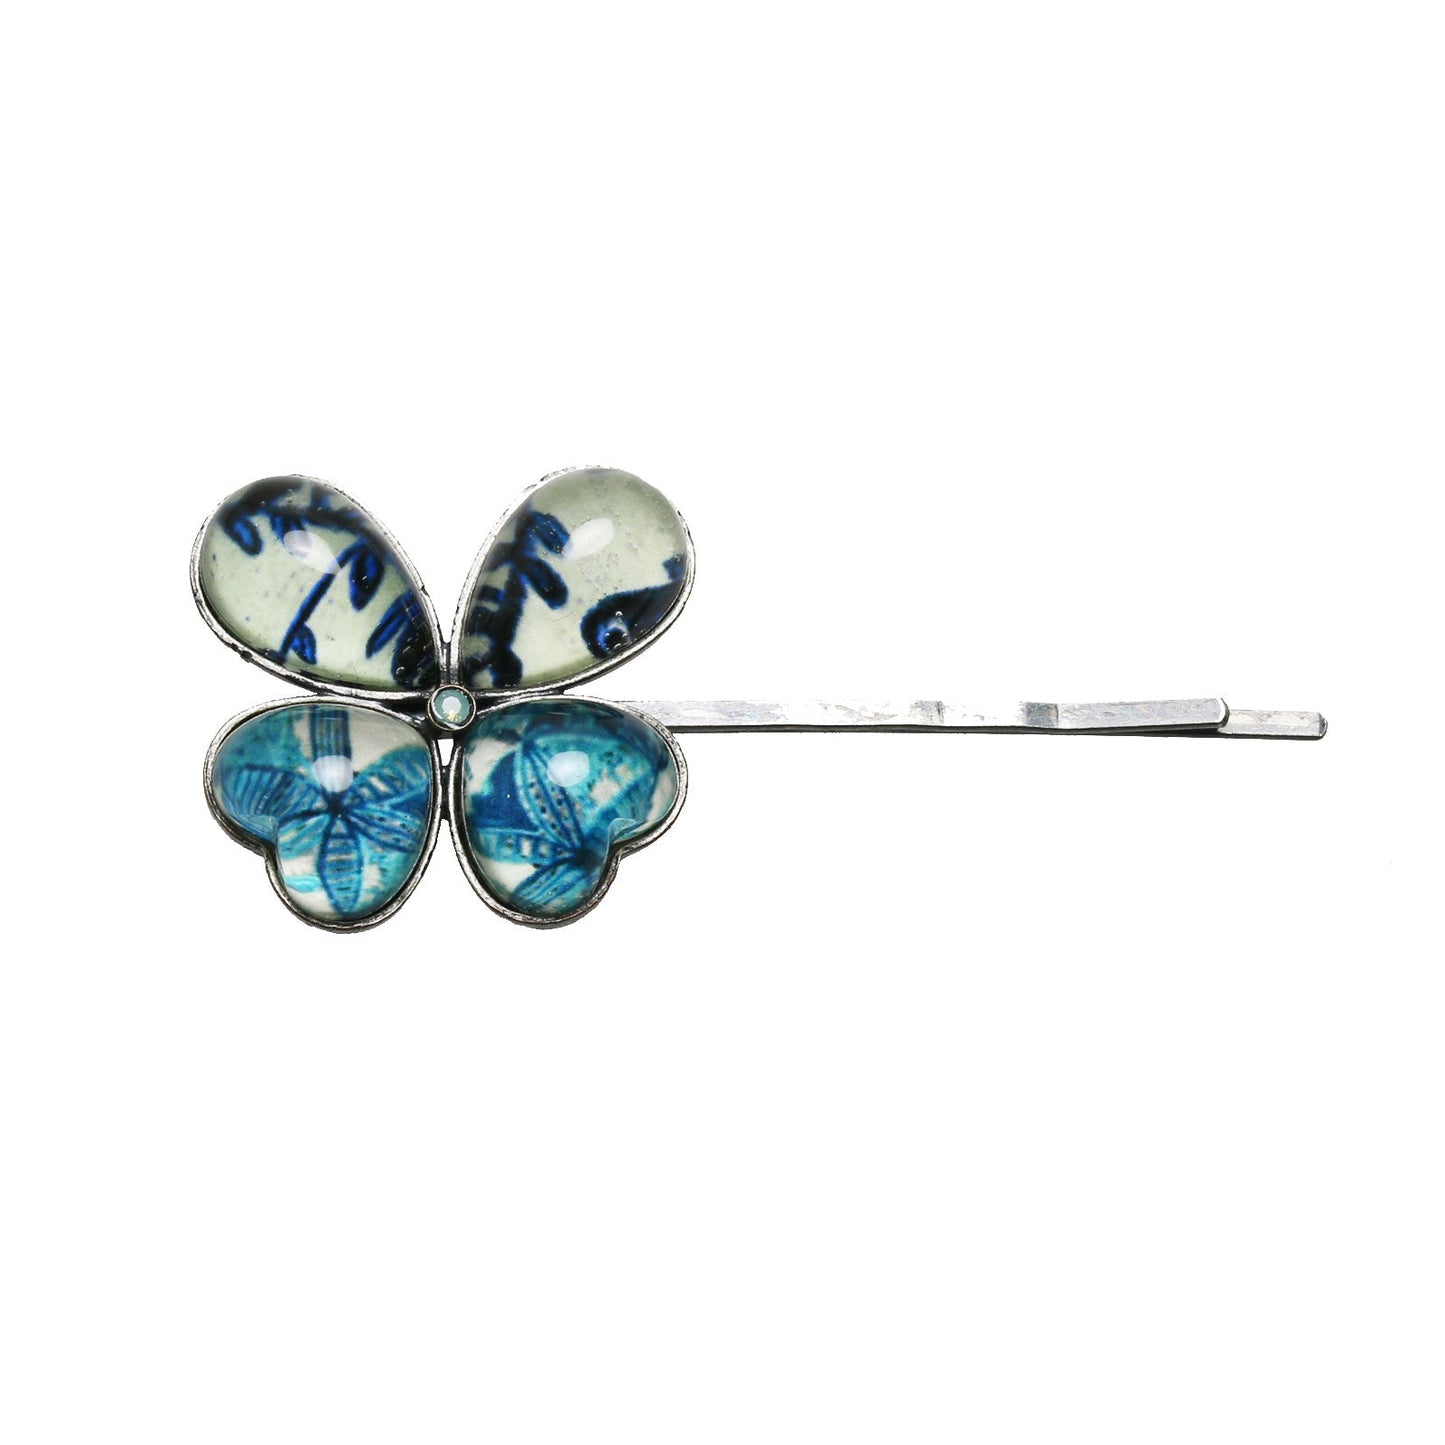 Gorgeous Hairpin Blue Butterfly Removable TAMARUSAN